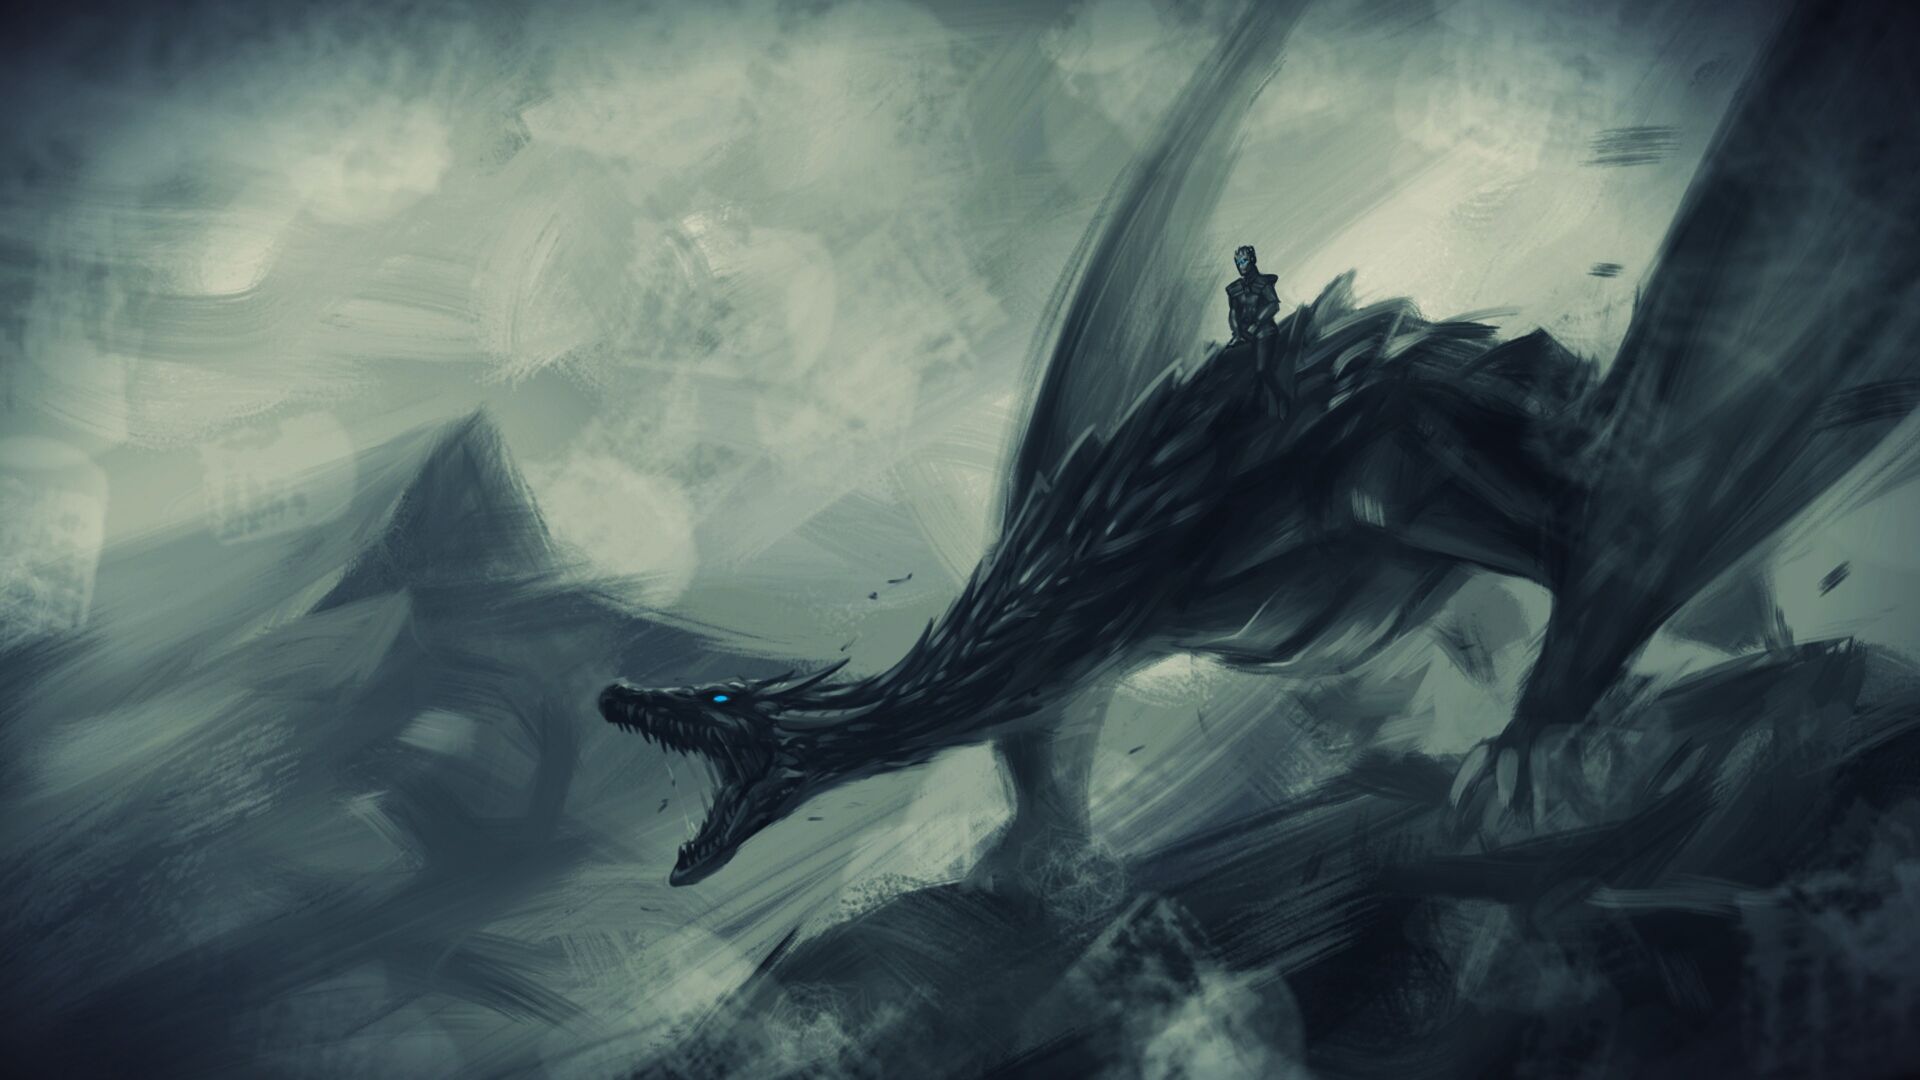 Desktop Wallpaper Dragon, White Walkers, Game Of Thrones, Art, Hd Image,  Picture, Background, 83948e